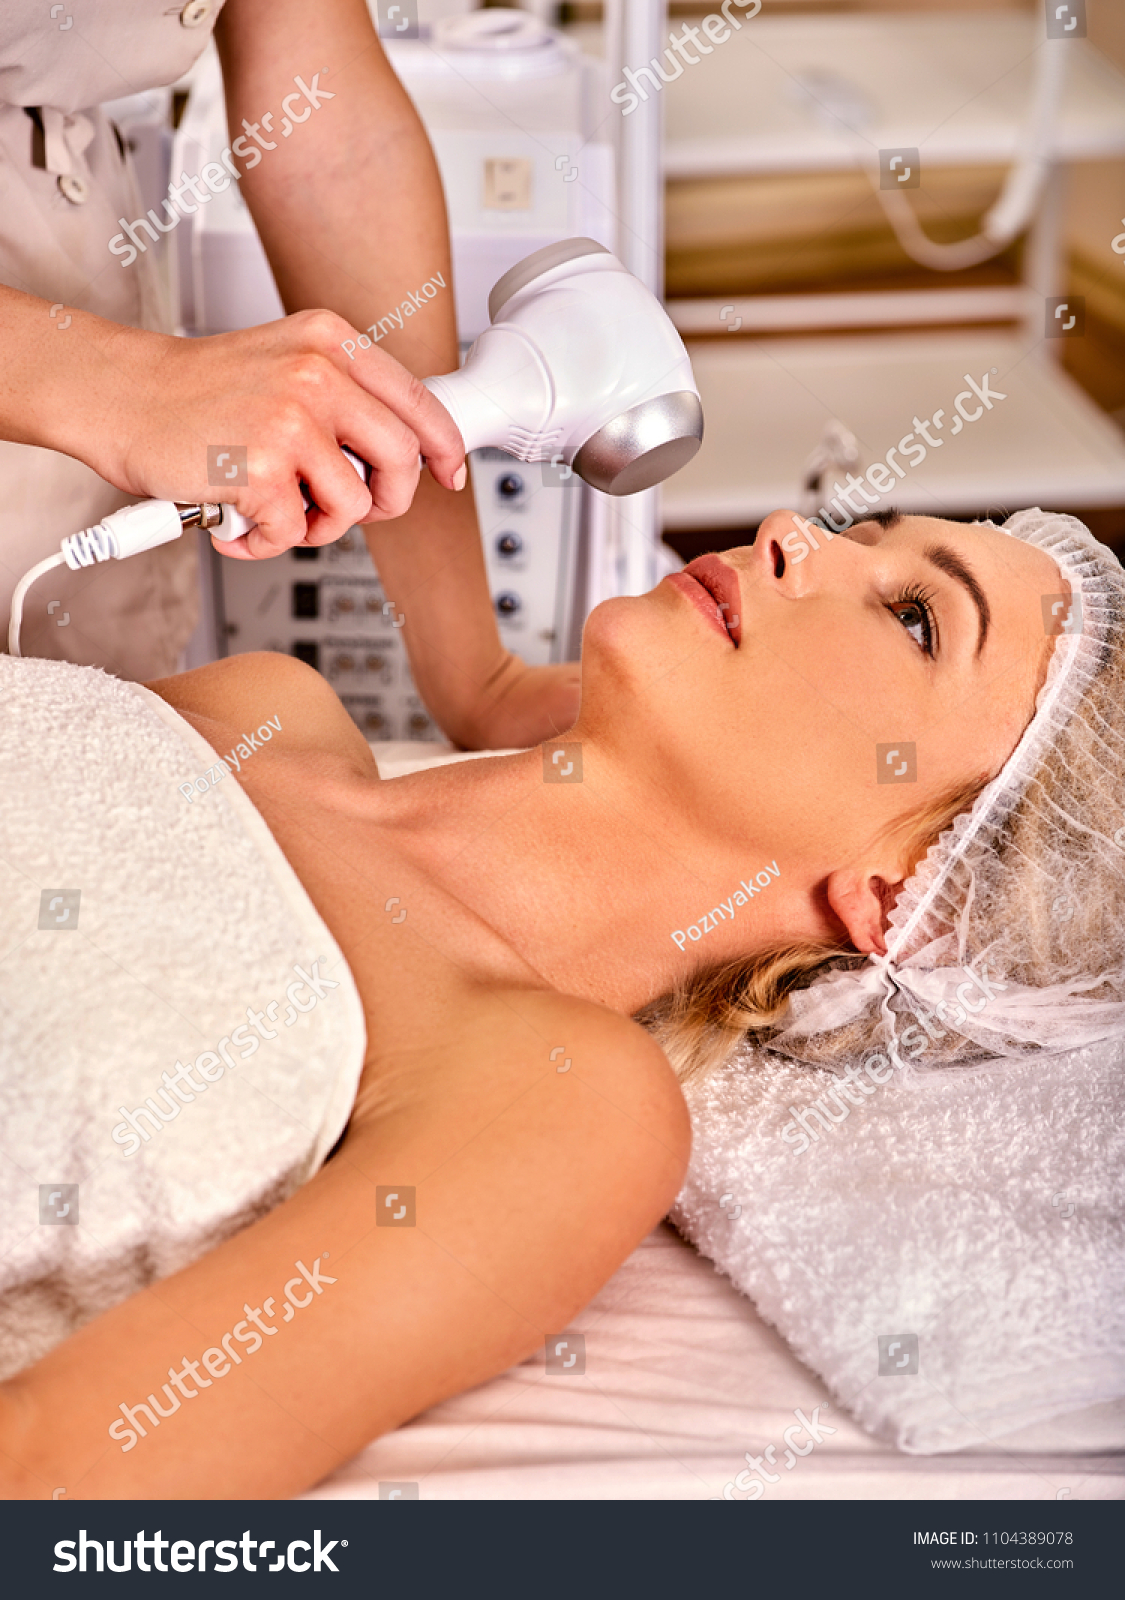 Ultrasonic facial treatment on ultrasound face machine. Woman receiving electric lift massage at spa salon. Electronic stimulation female muscles microcurrent therapy. Removal of pigmented spots. #1104389078